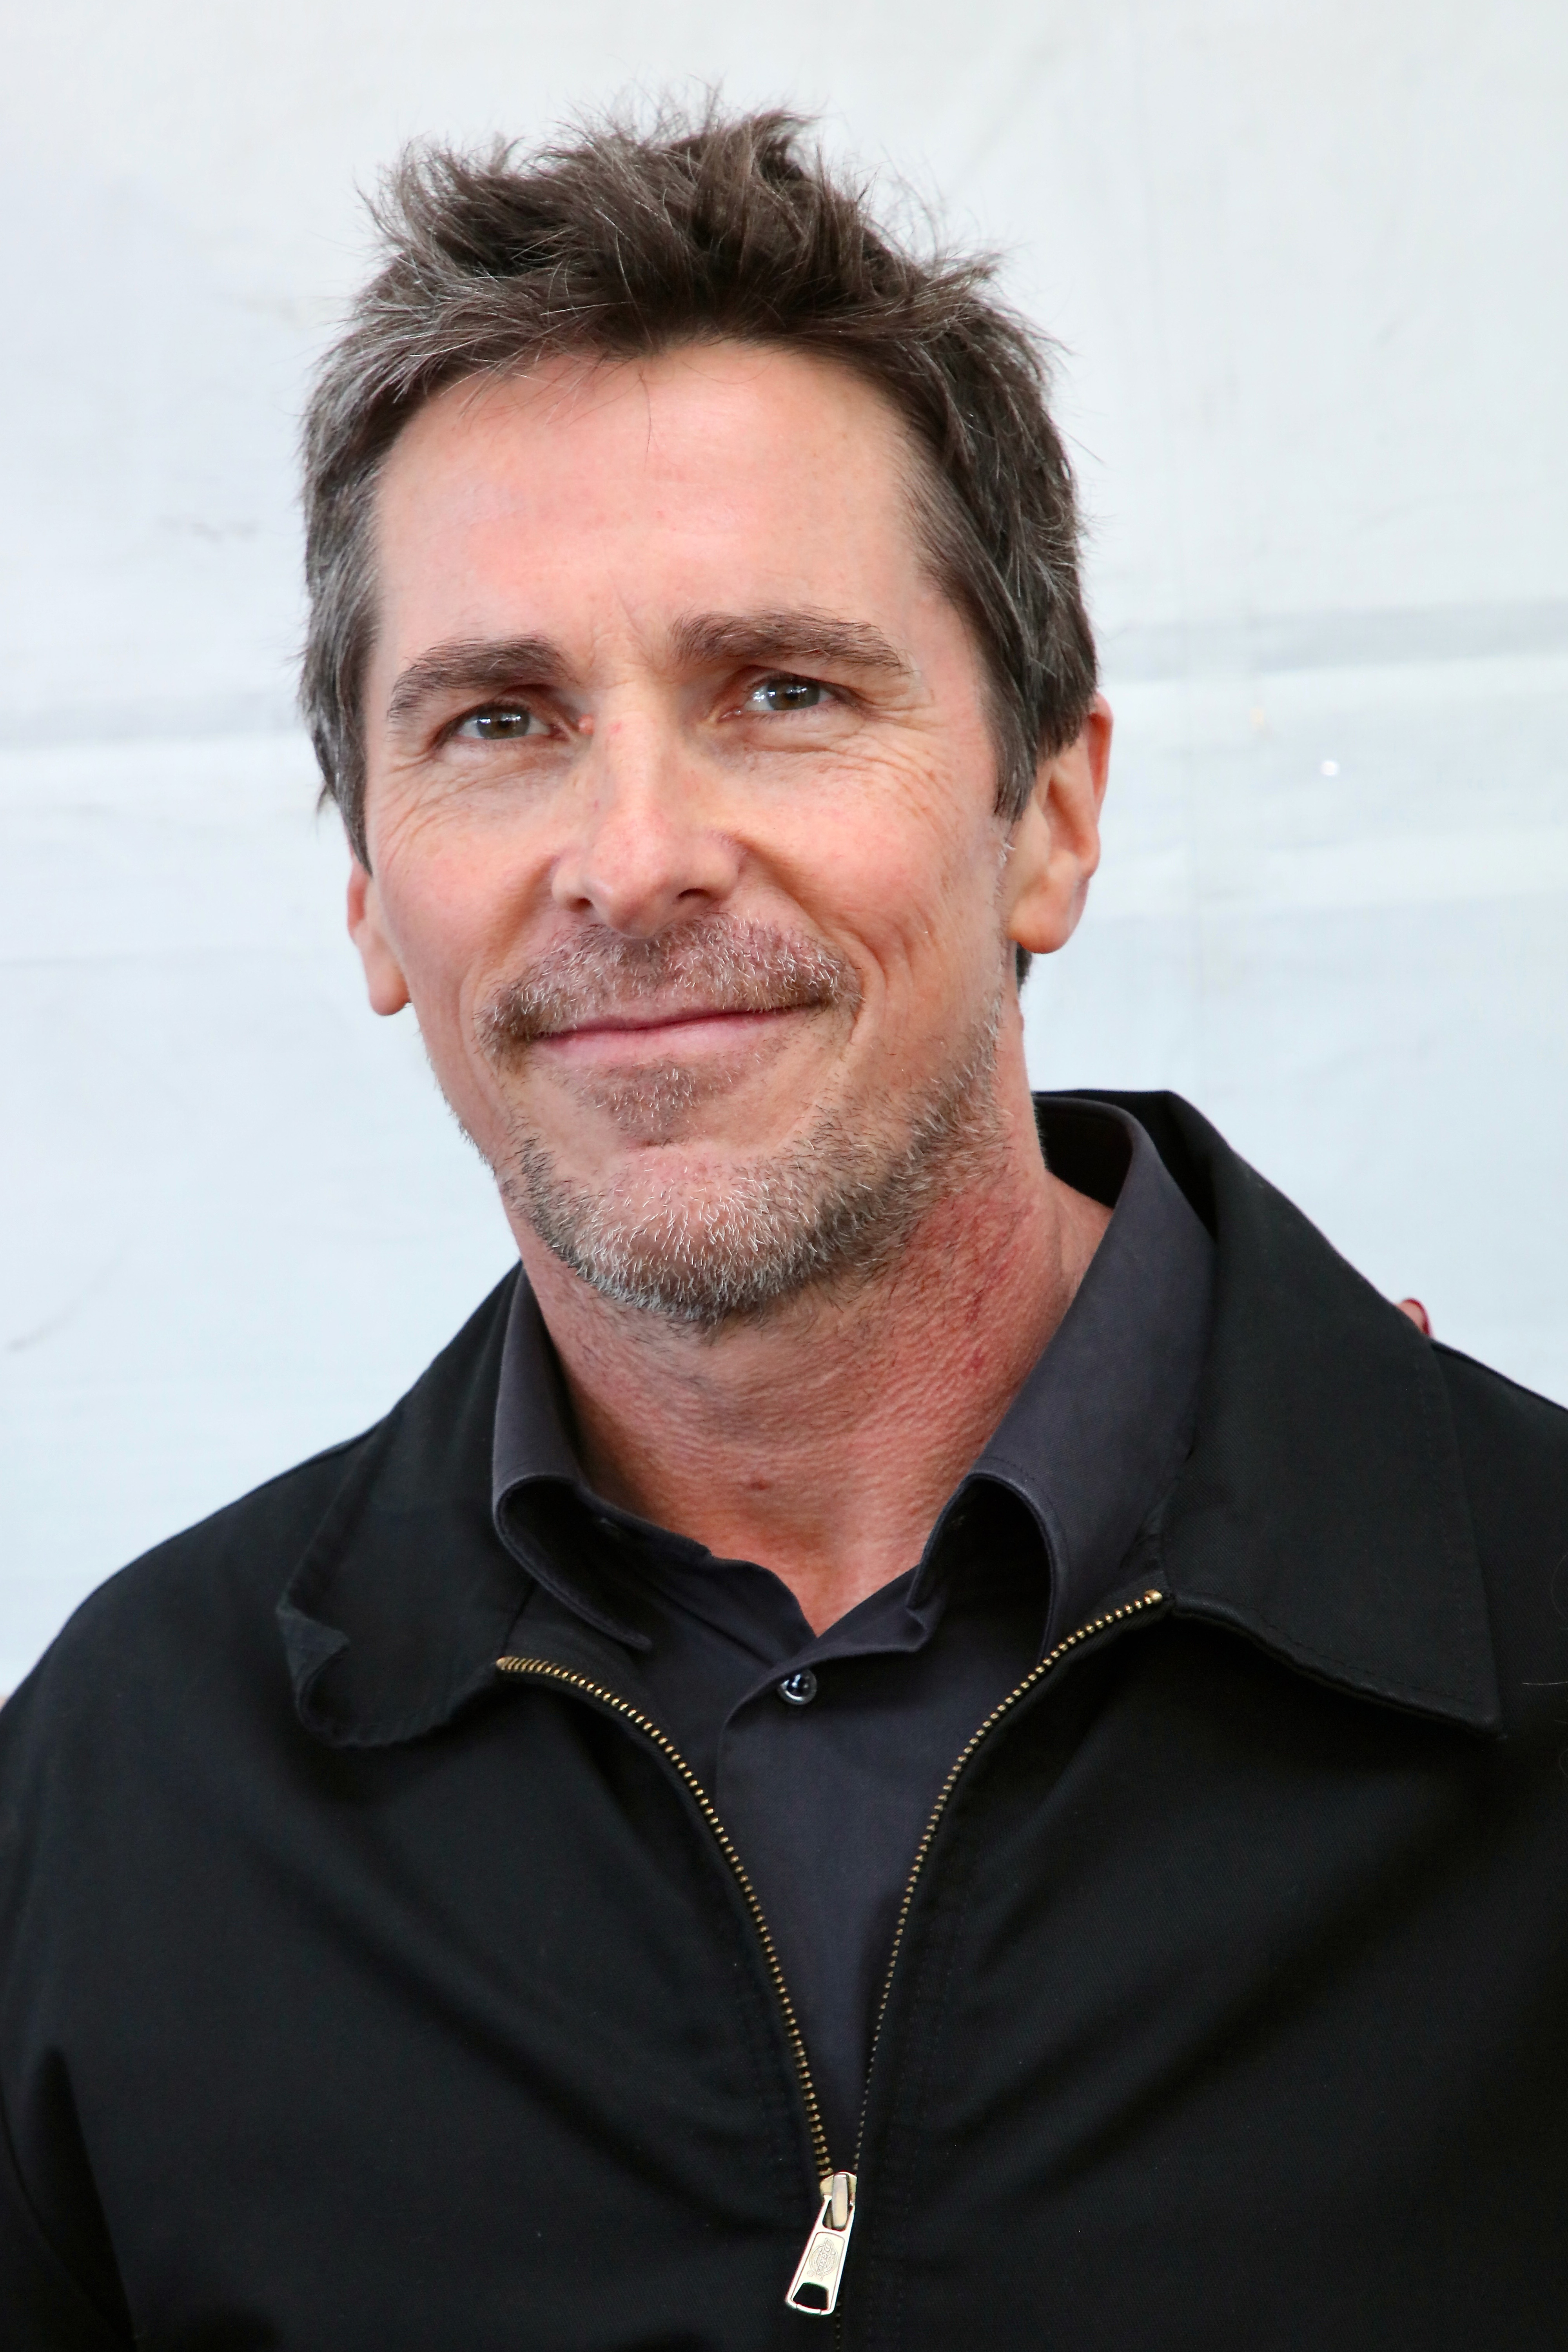 A close-up of Christian Bale smiling at the camera